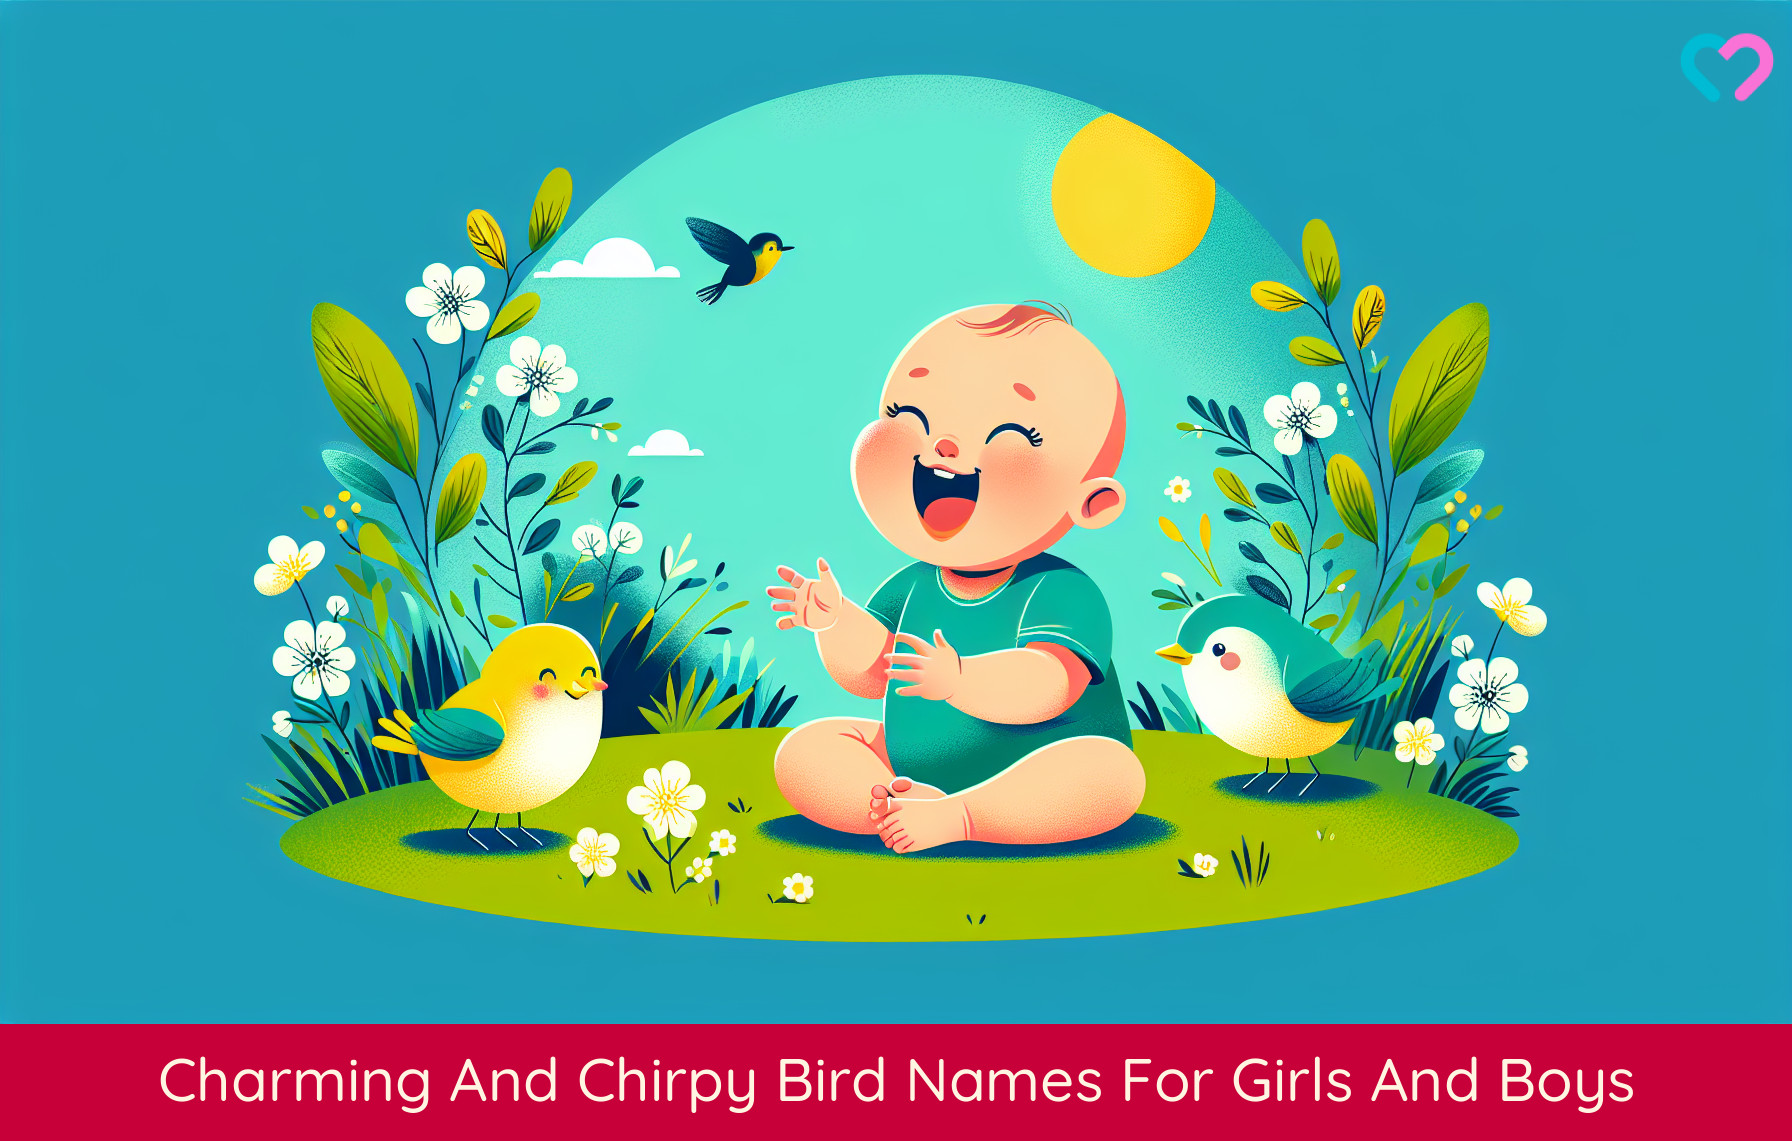 Charming And Chirpy Bird Names For Girls And Boys_illustration